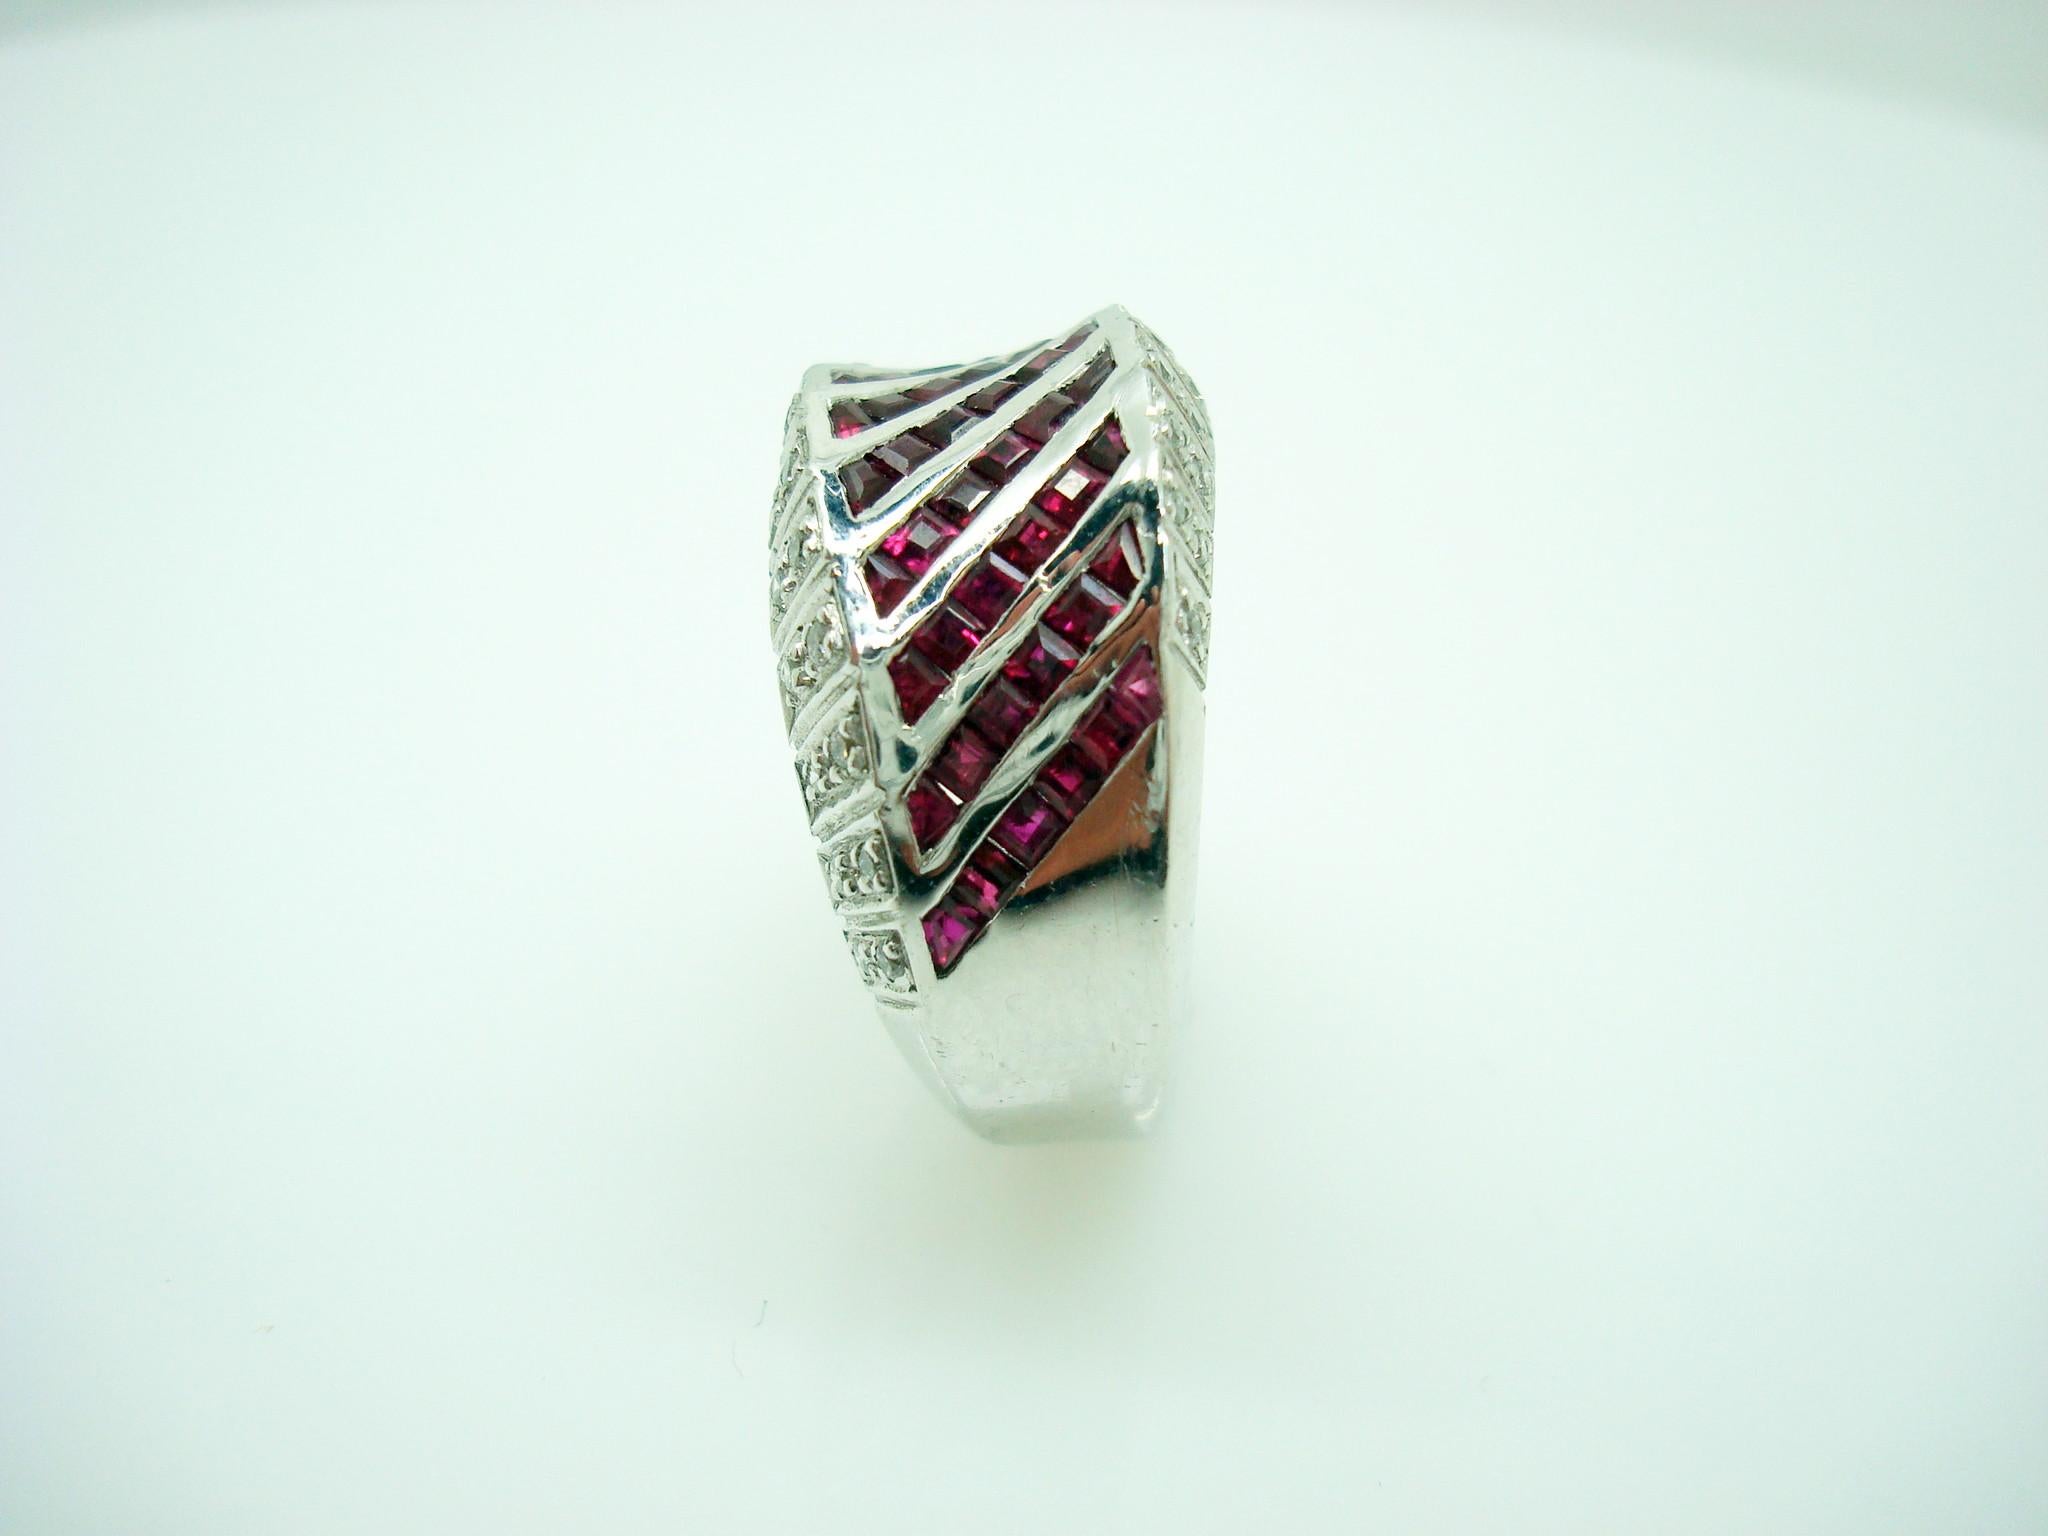 Contemporary 18K Gold Ring Band w/ 1.38ct Total Genuine Rubies & .17ct Total Diamonds #J2820